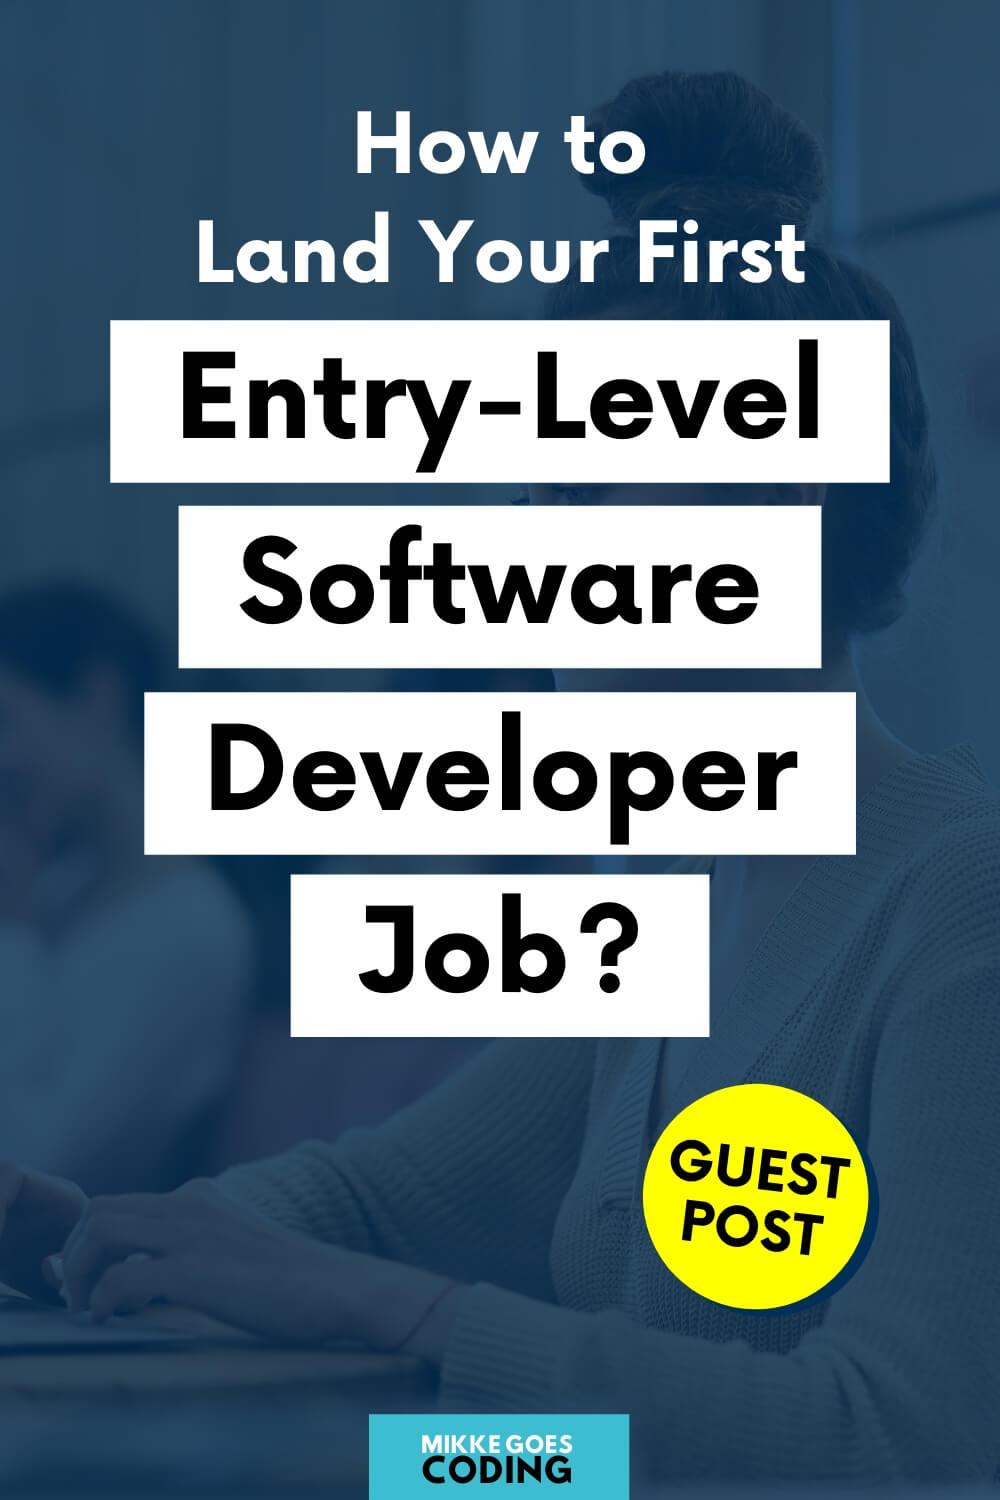 How to land your first entry-level software developer job - Beginners guide